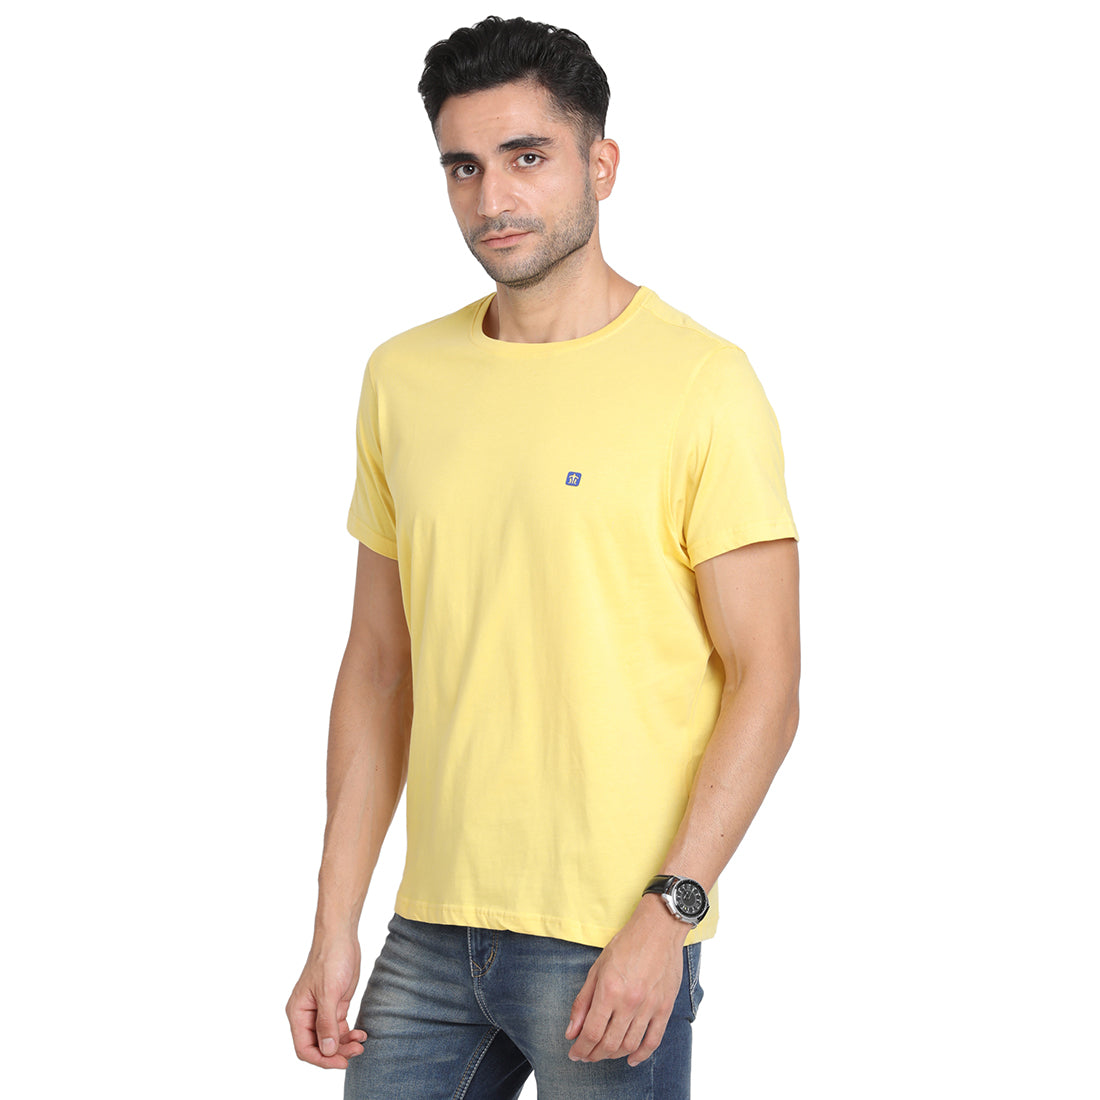 100% Cotton Yellow Chest Printed Round Neck Half Sleeve Casual Essential T-Shirt